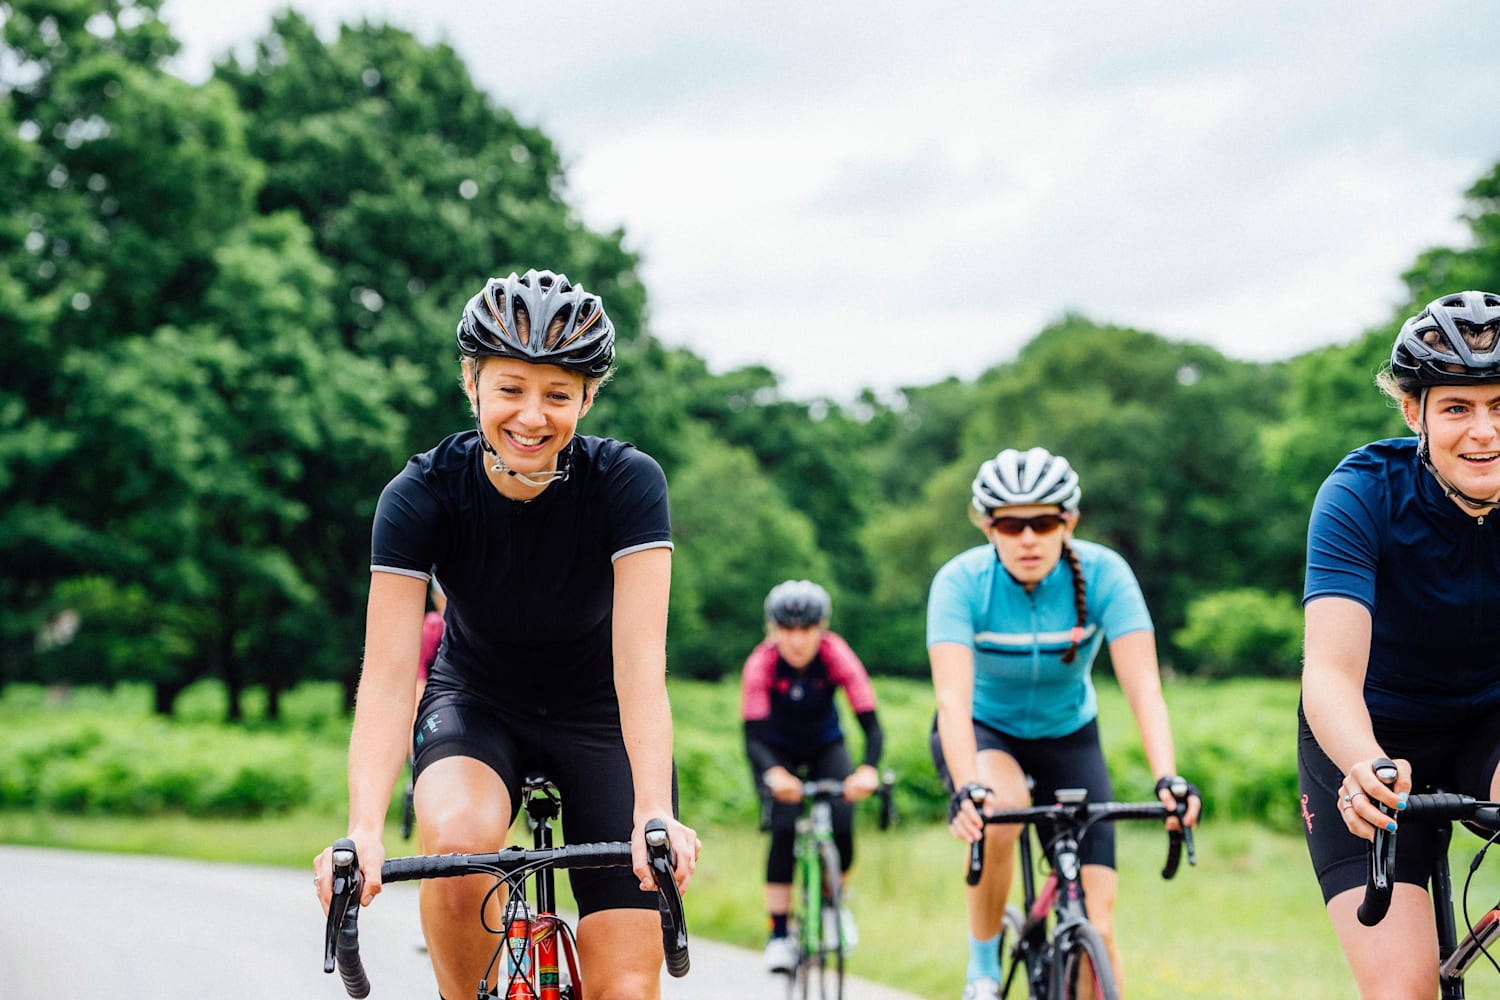 Female cycling events in the UK: Perfect for any level